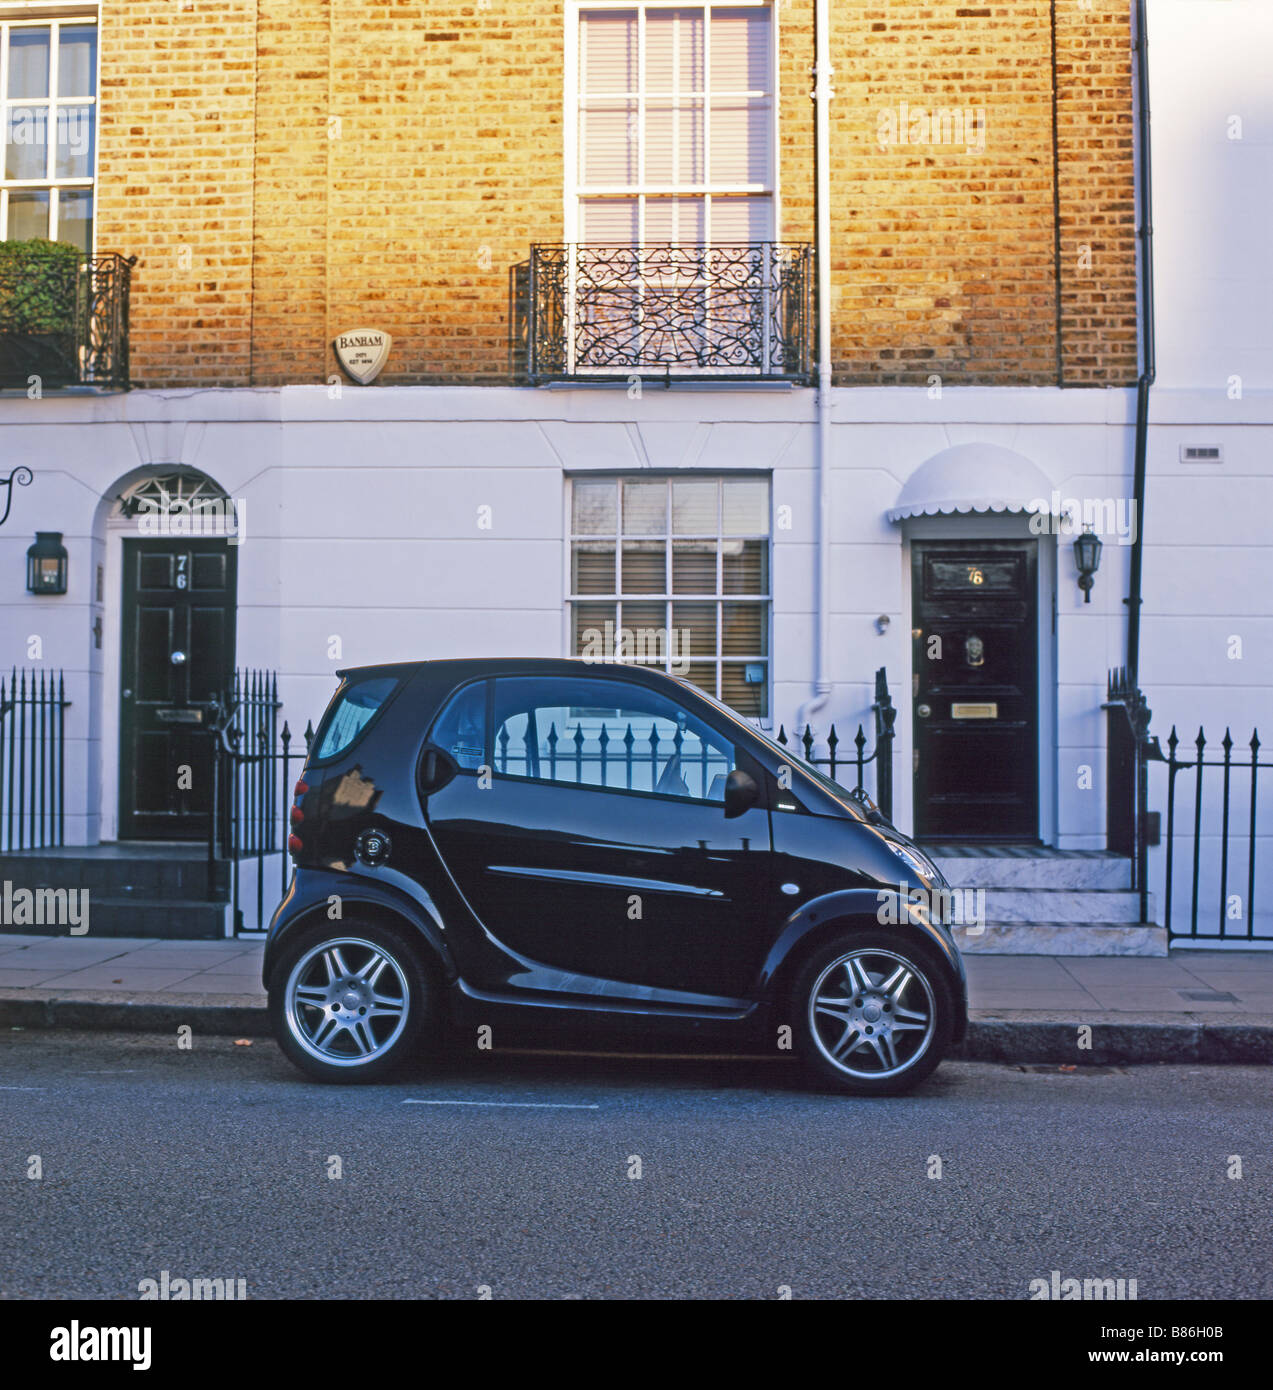 A black Smart Car parked in front of a row of terraced housing flats front doors in opulent Chelsea London England UK  KATHY DEWITT Stock Photo